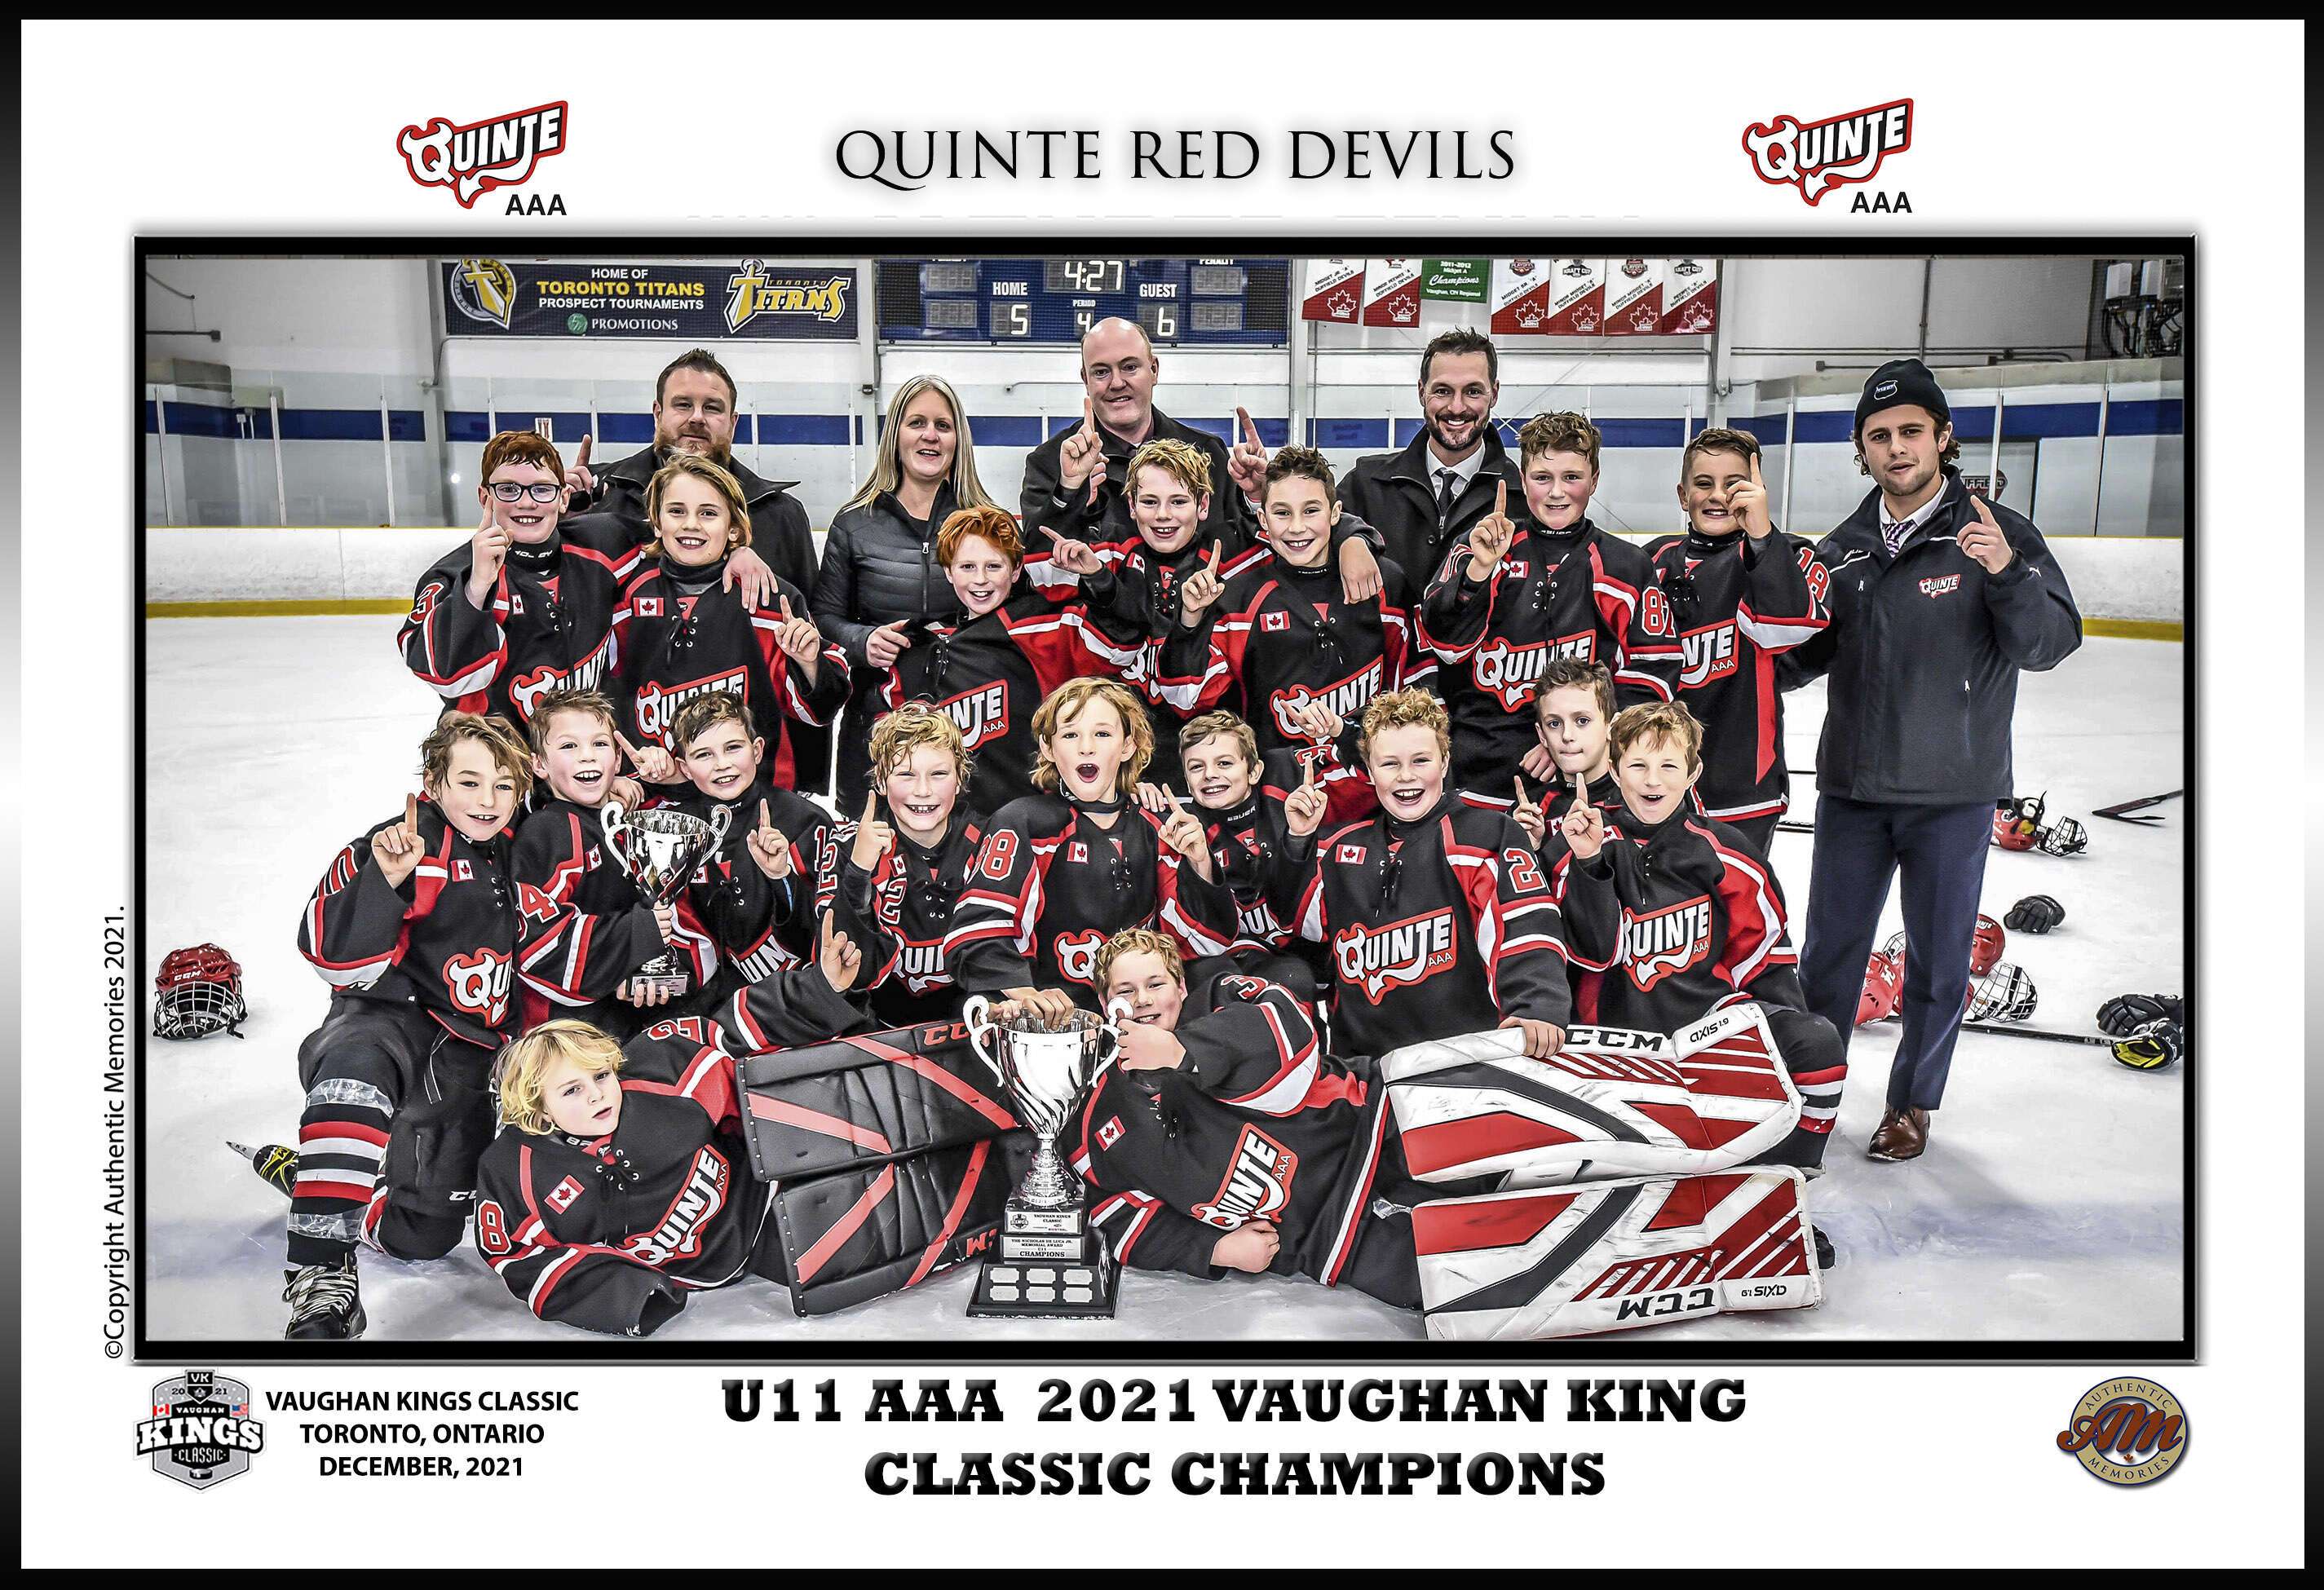 2021-2022 > U9 > News > The Foley Bus Lines QRD U9 AAA Team are YGK  Tournament Champions (Quinte Red Devils)